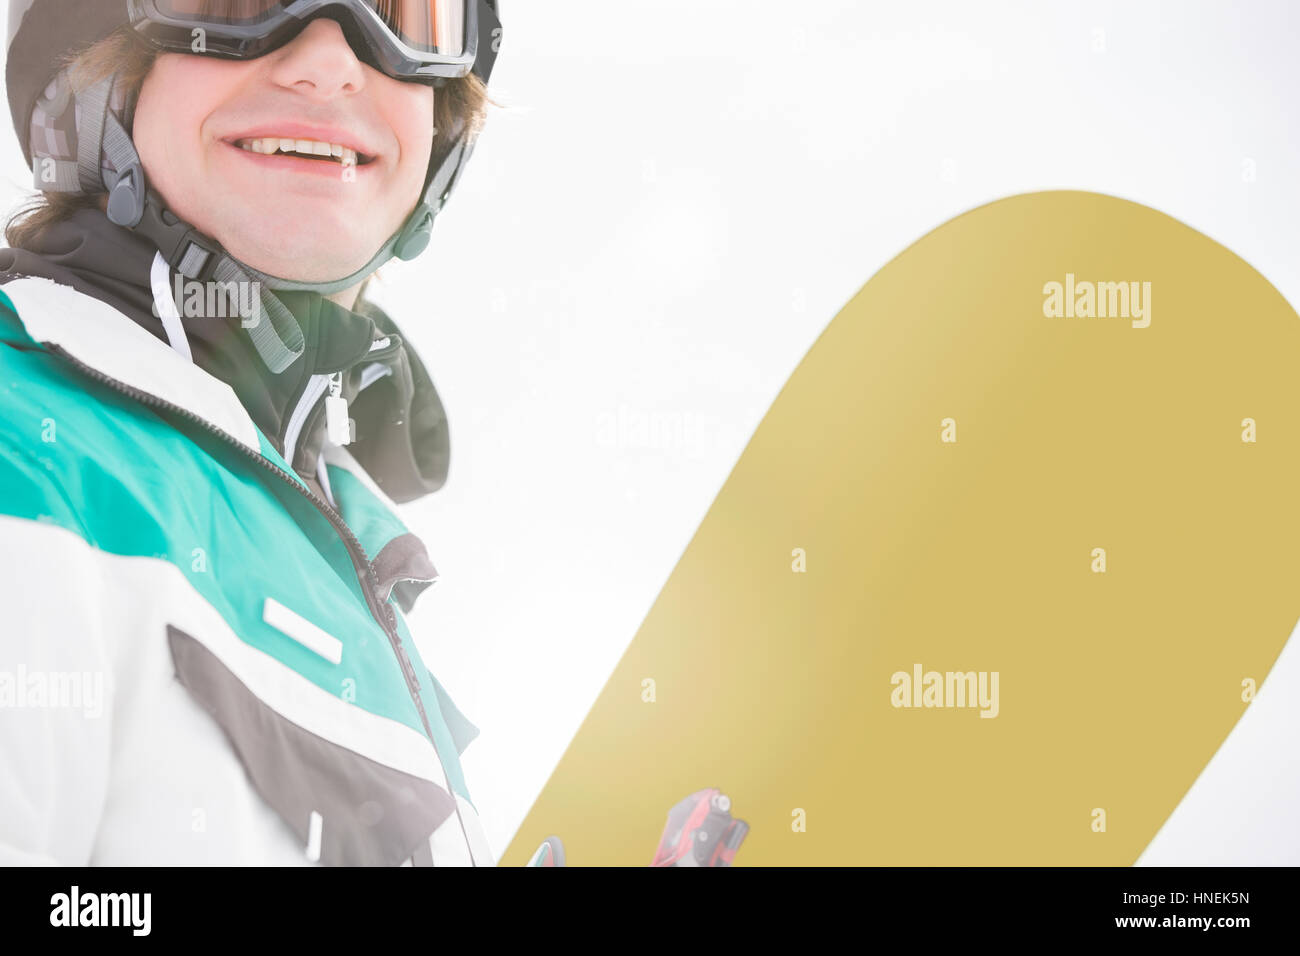 Smiling young man holding snowboard Stock Photo